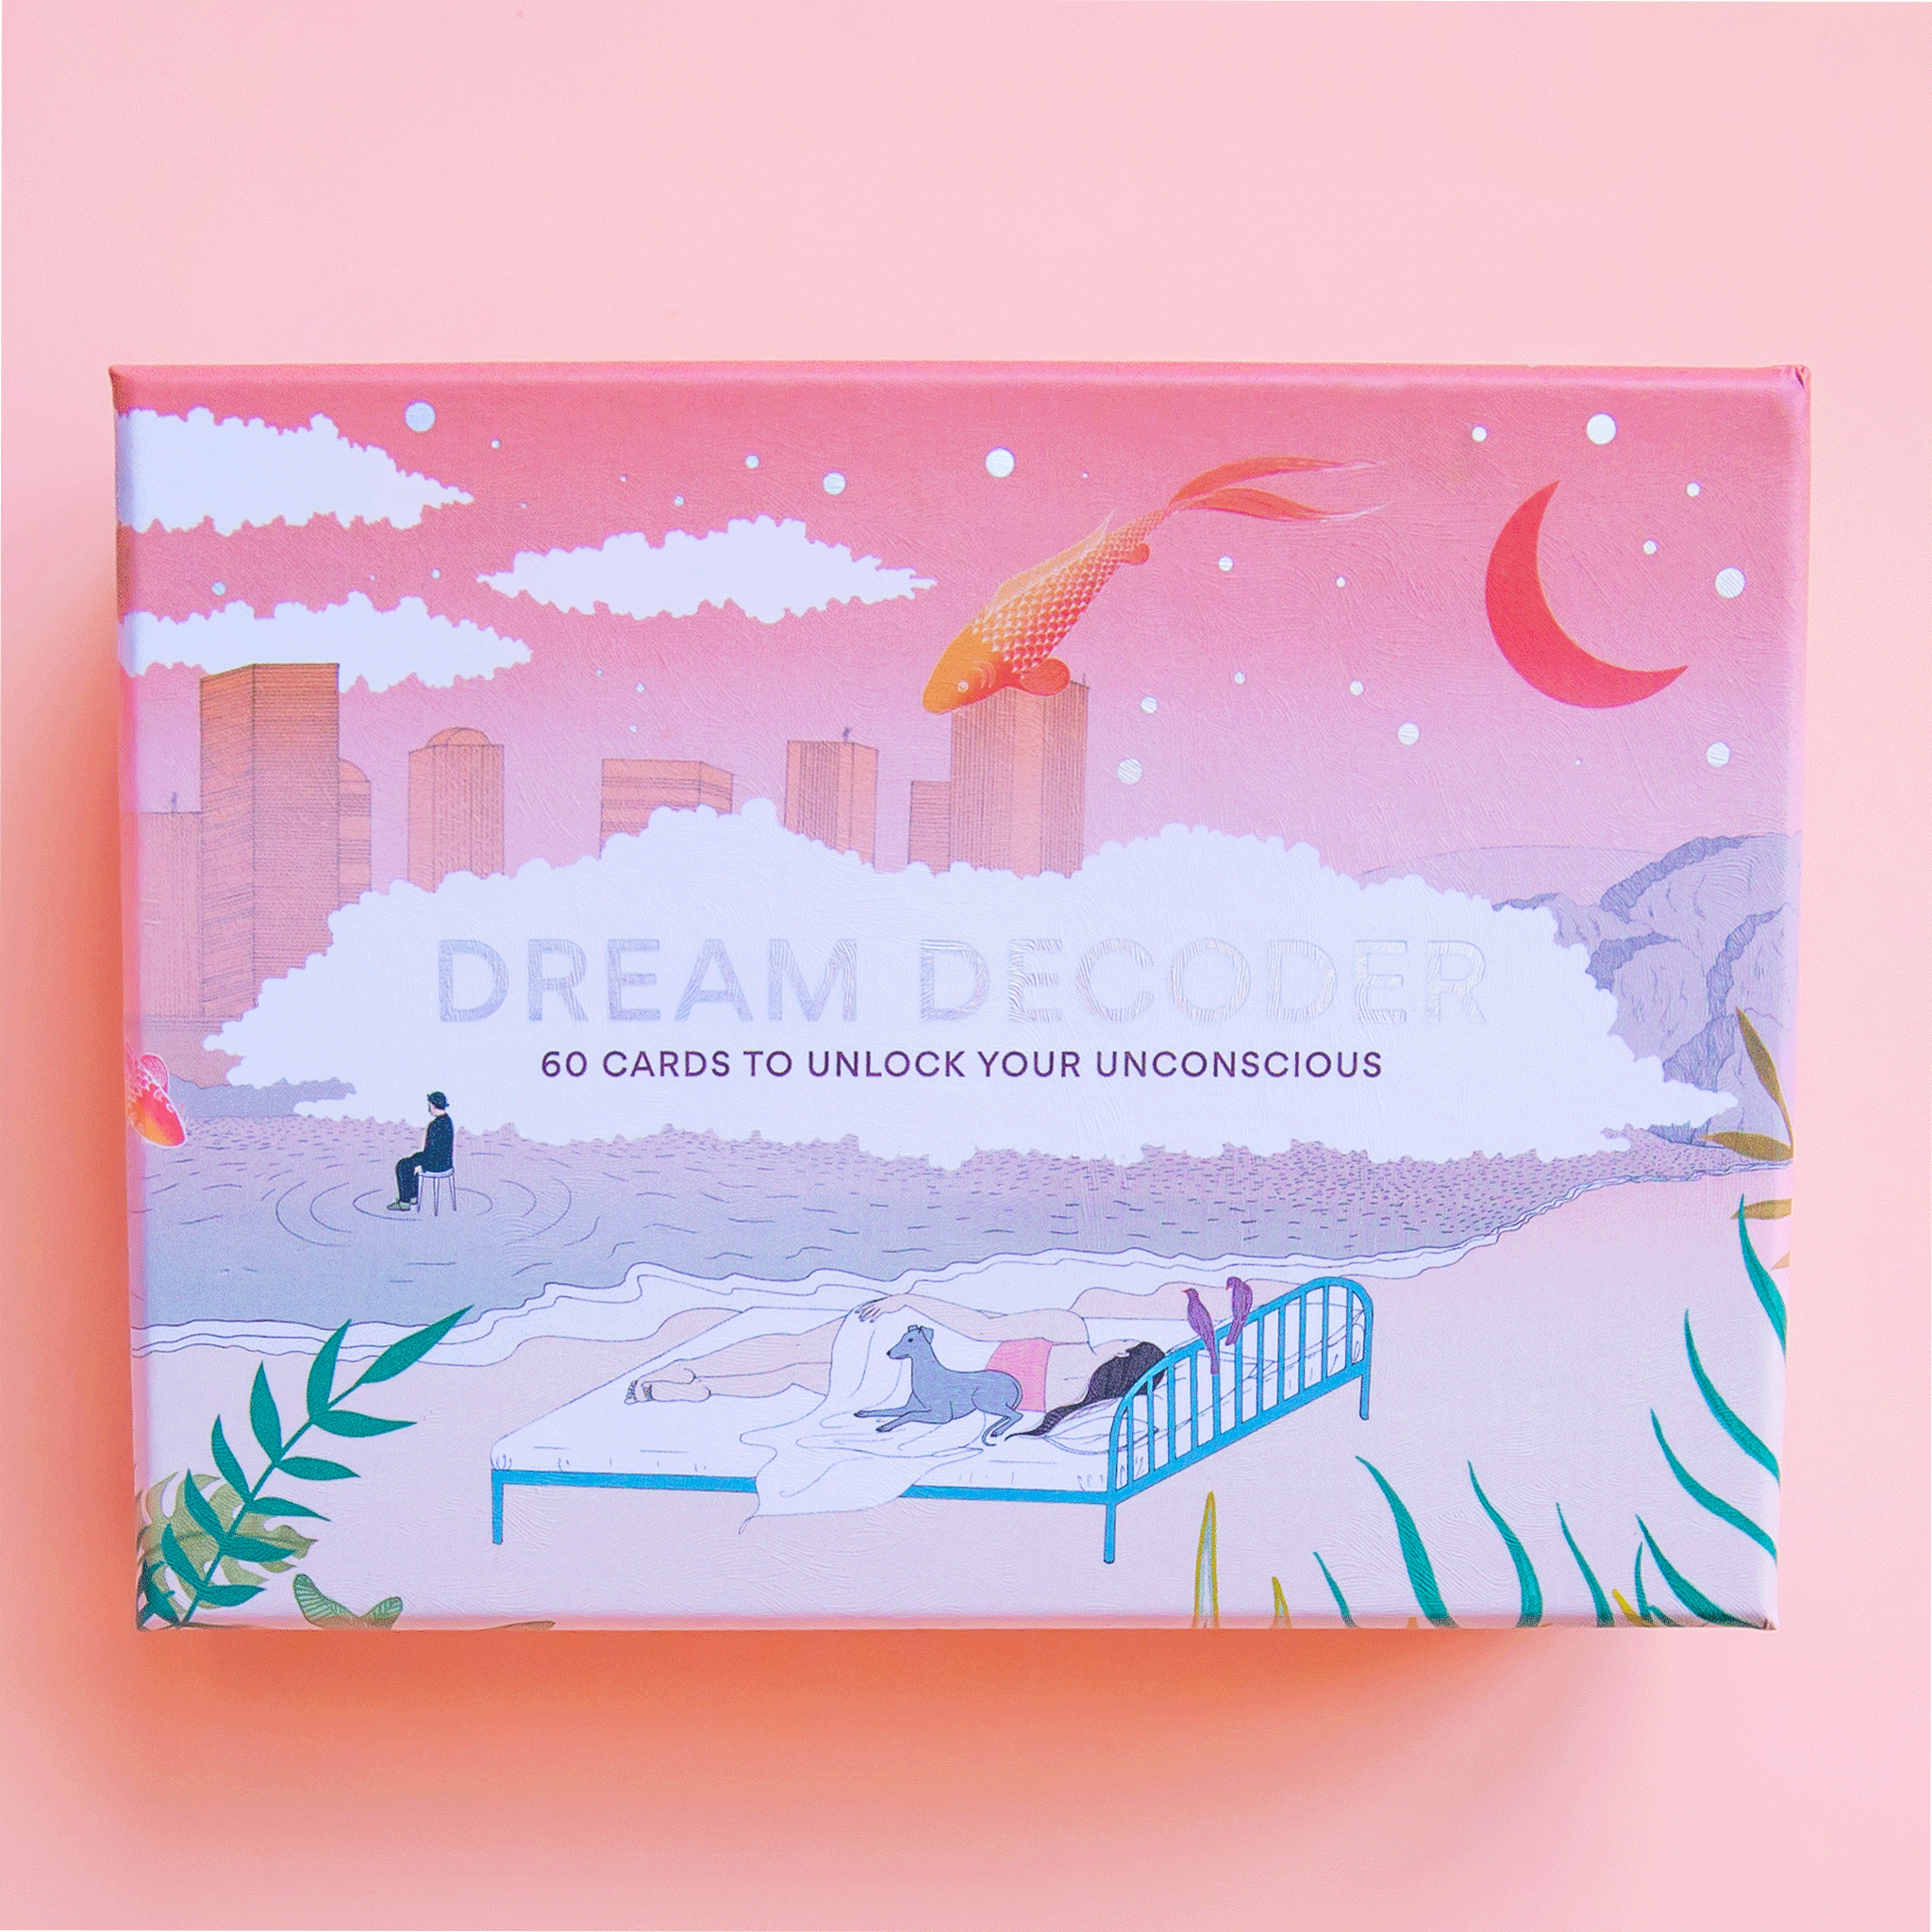 A box with dreamy graphics of the sky and a city with clouds and a bed on the beach. Also photographed are the cards inside of the box that have illustrations of different dream scenarios along with words on the back describing their meaning.